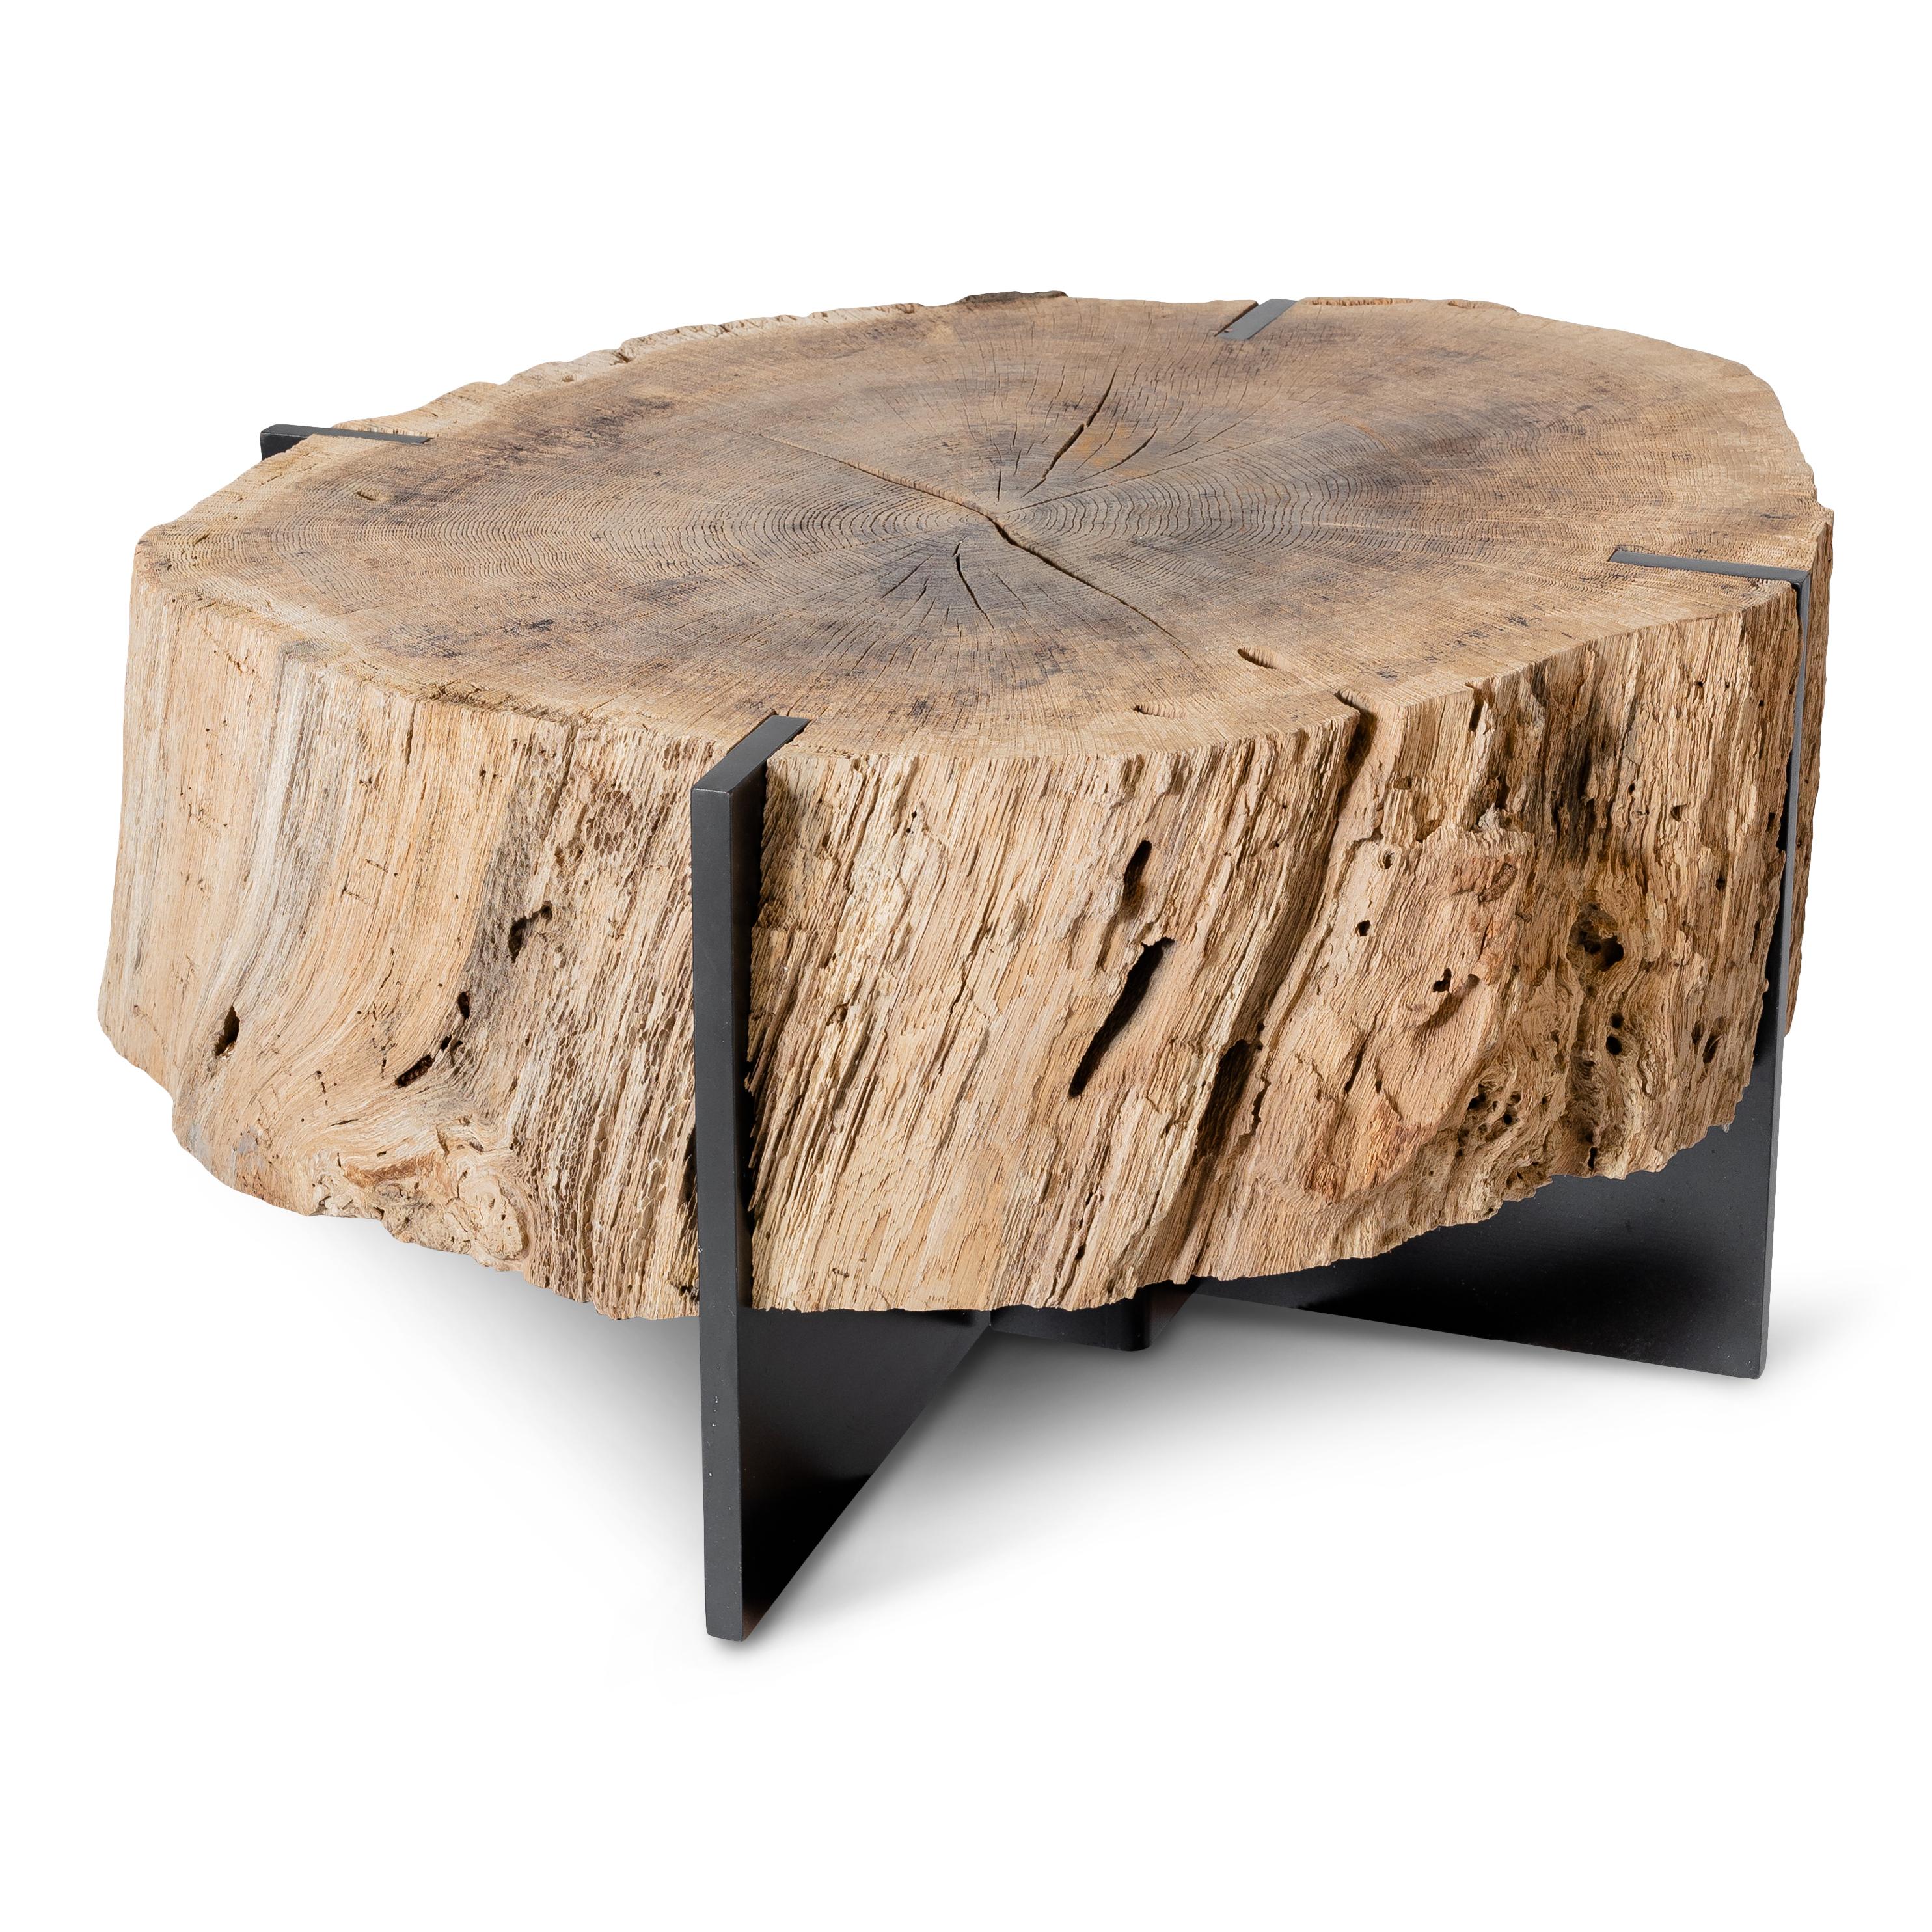 Organic form oak side table Medici Gardens Florence Italy

Piece from our one-of-a-kind collection, Le Monde. Exclusive to Brendan Bass. 

Globally curated by Brendan Bass, Le Monde furniture and accessories offer modern sensibility, provincial